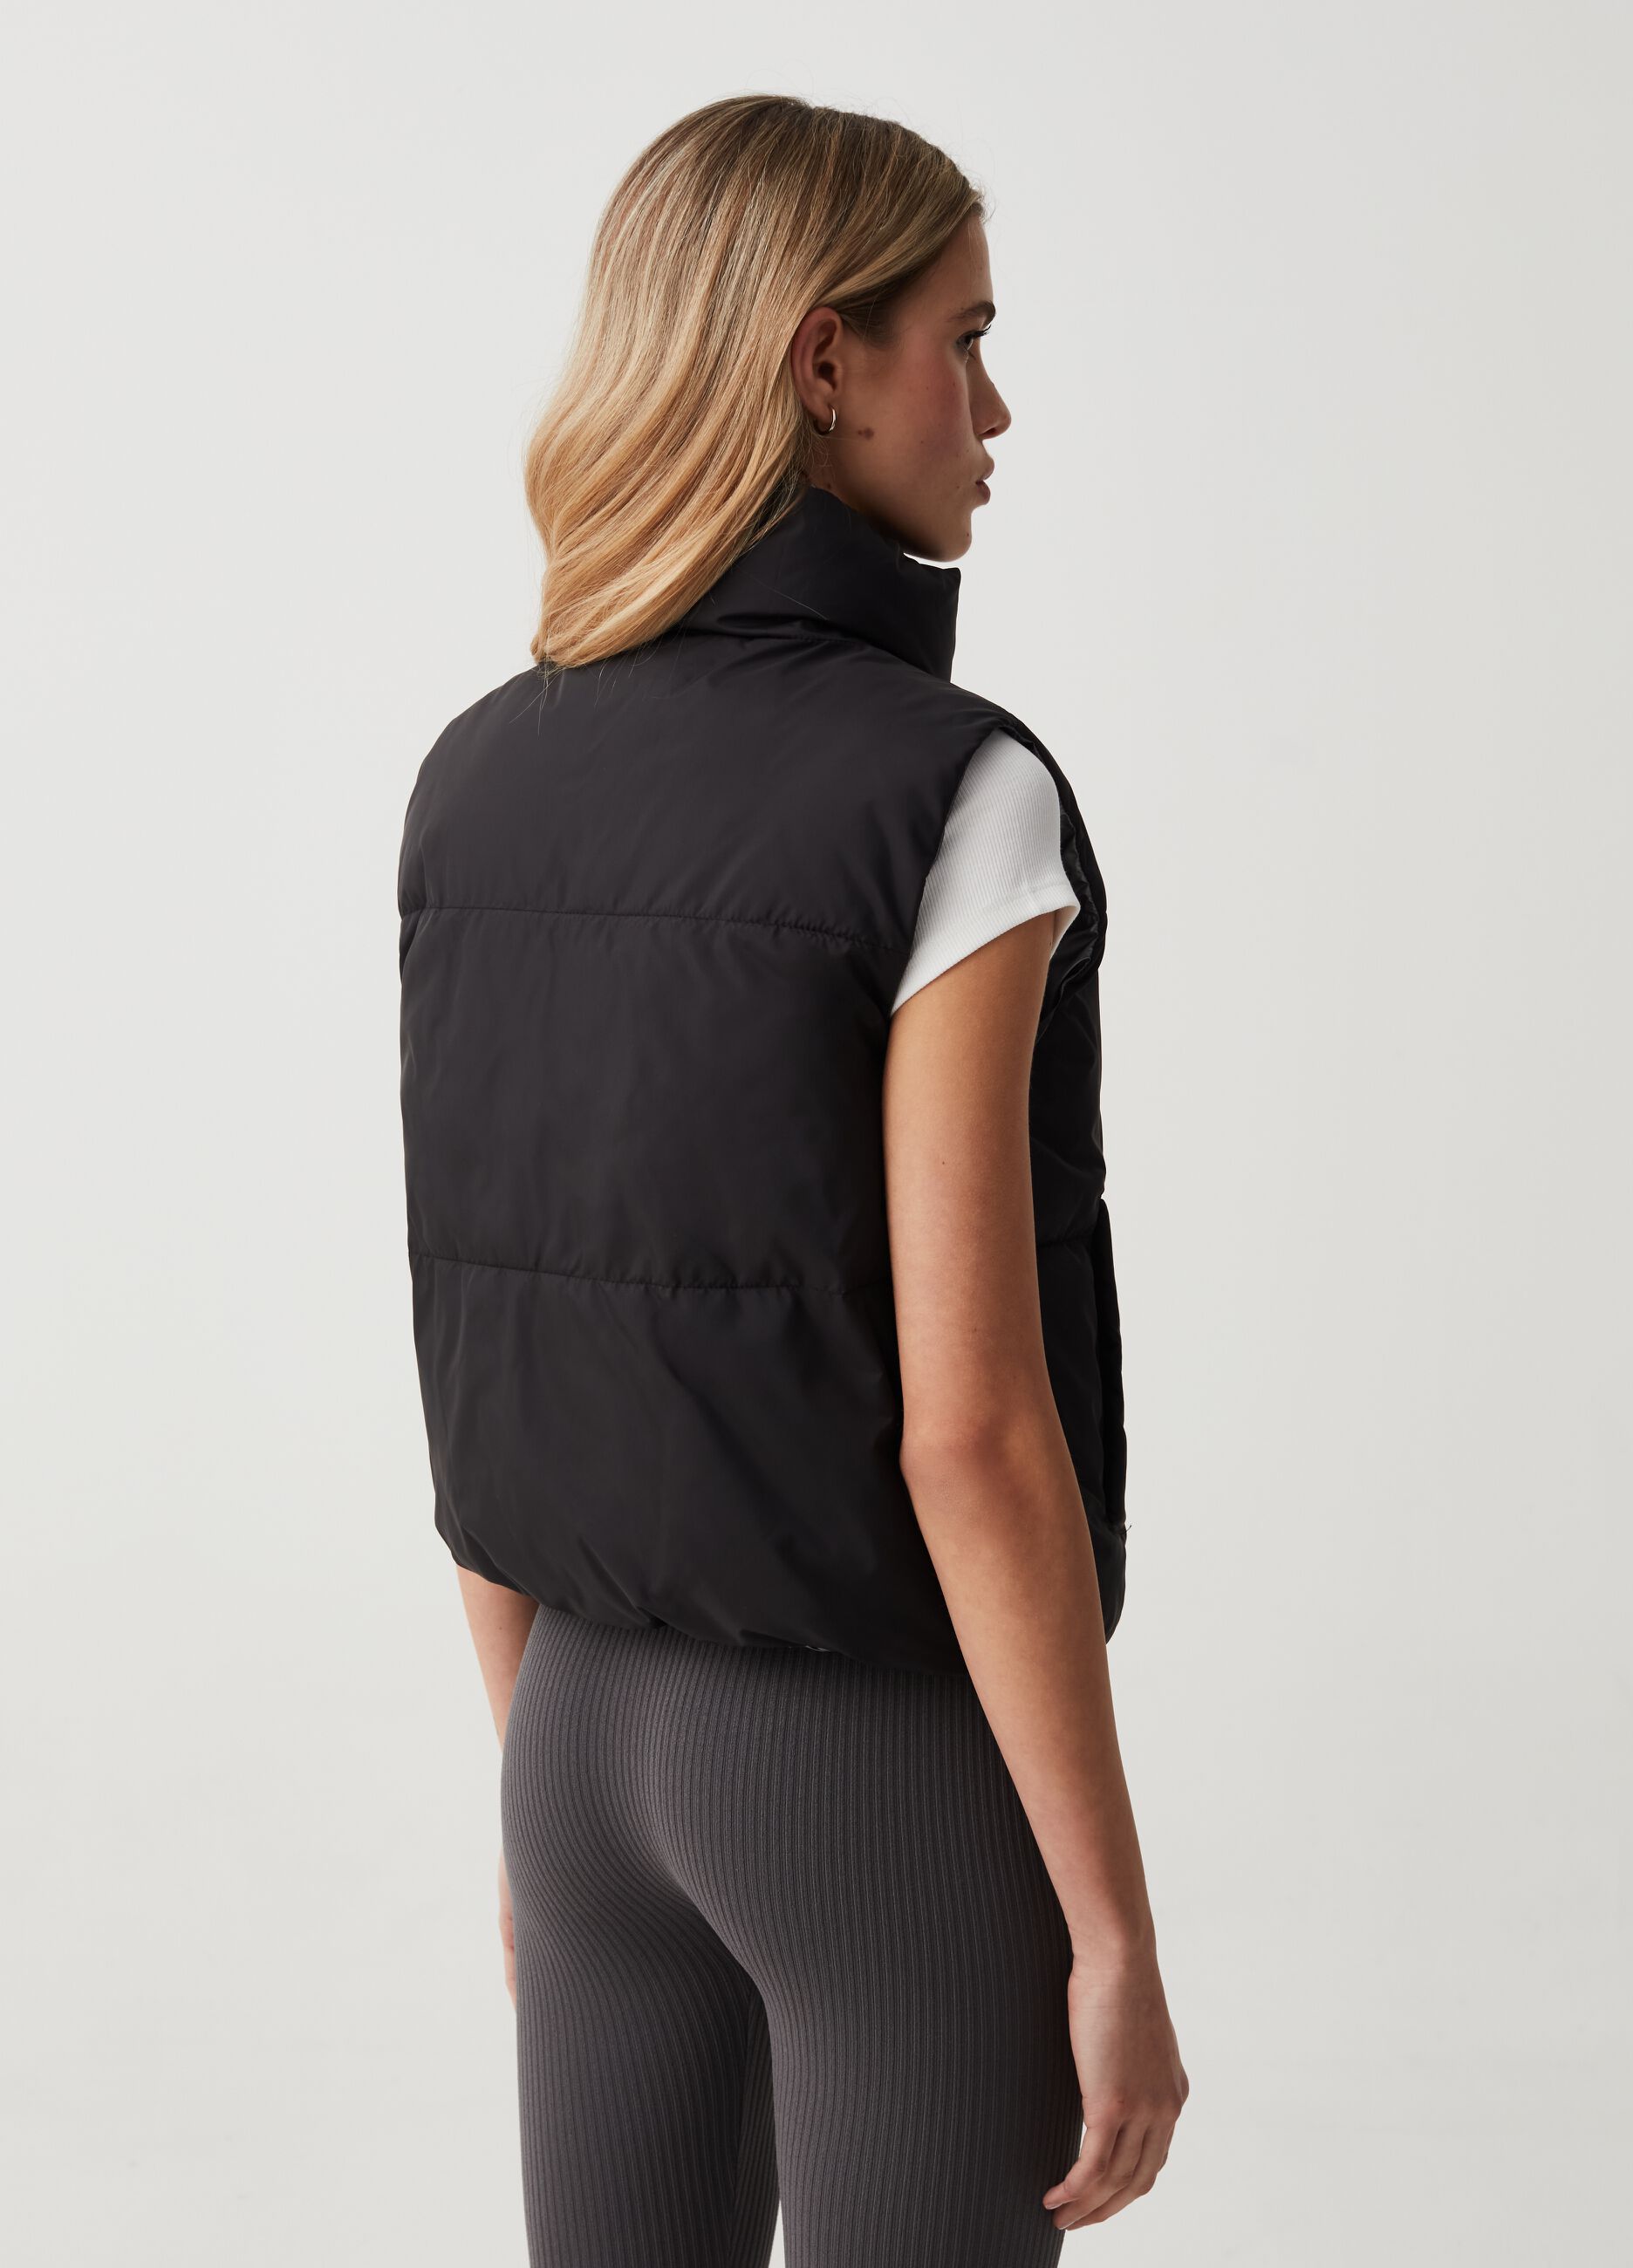 Reversible ultralight gilet with high neck